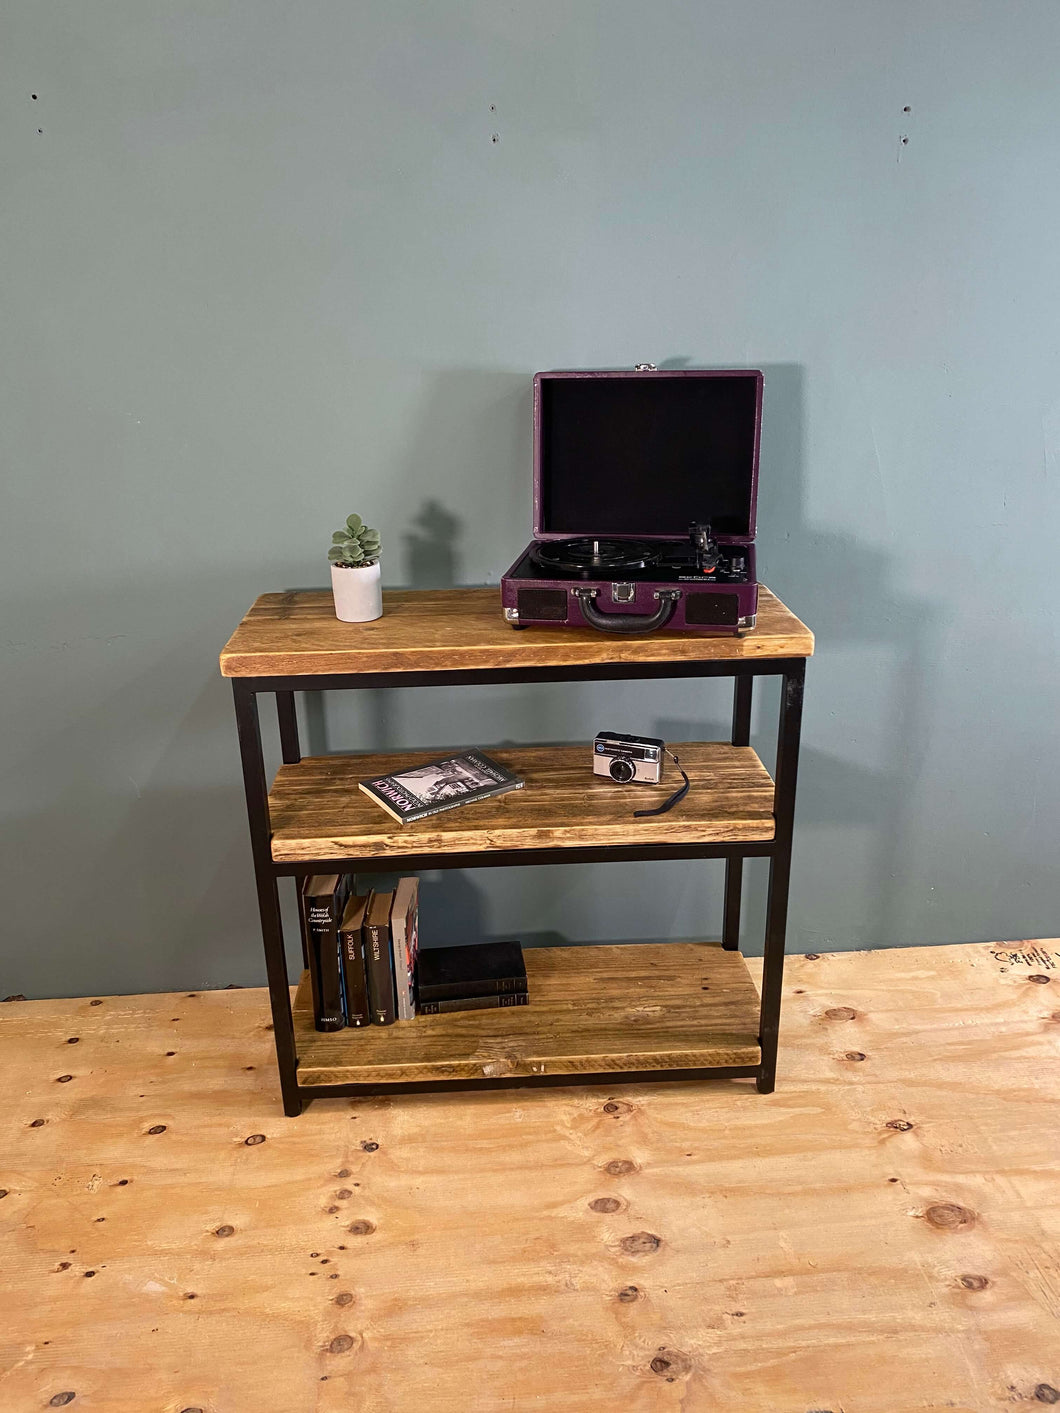 Industrial shelf unit handmade from reclaimed wood and steel